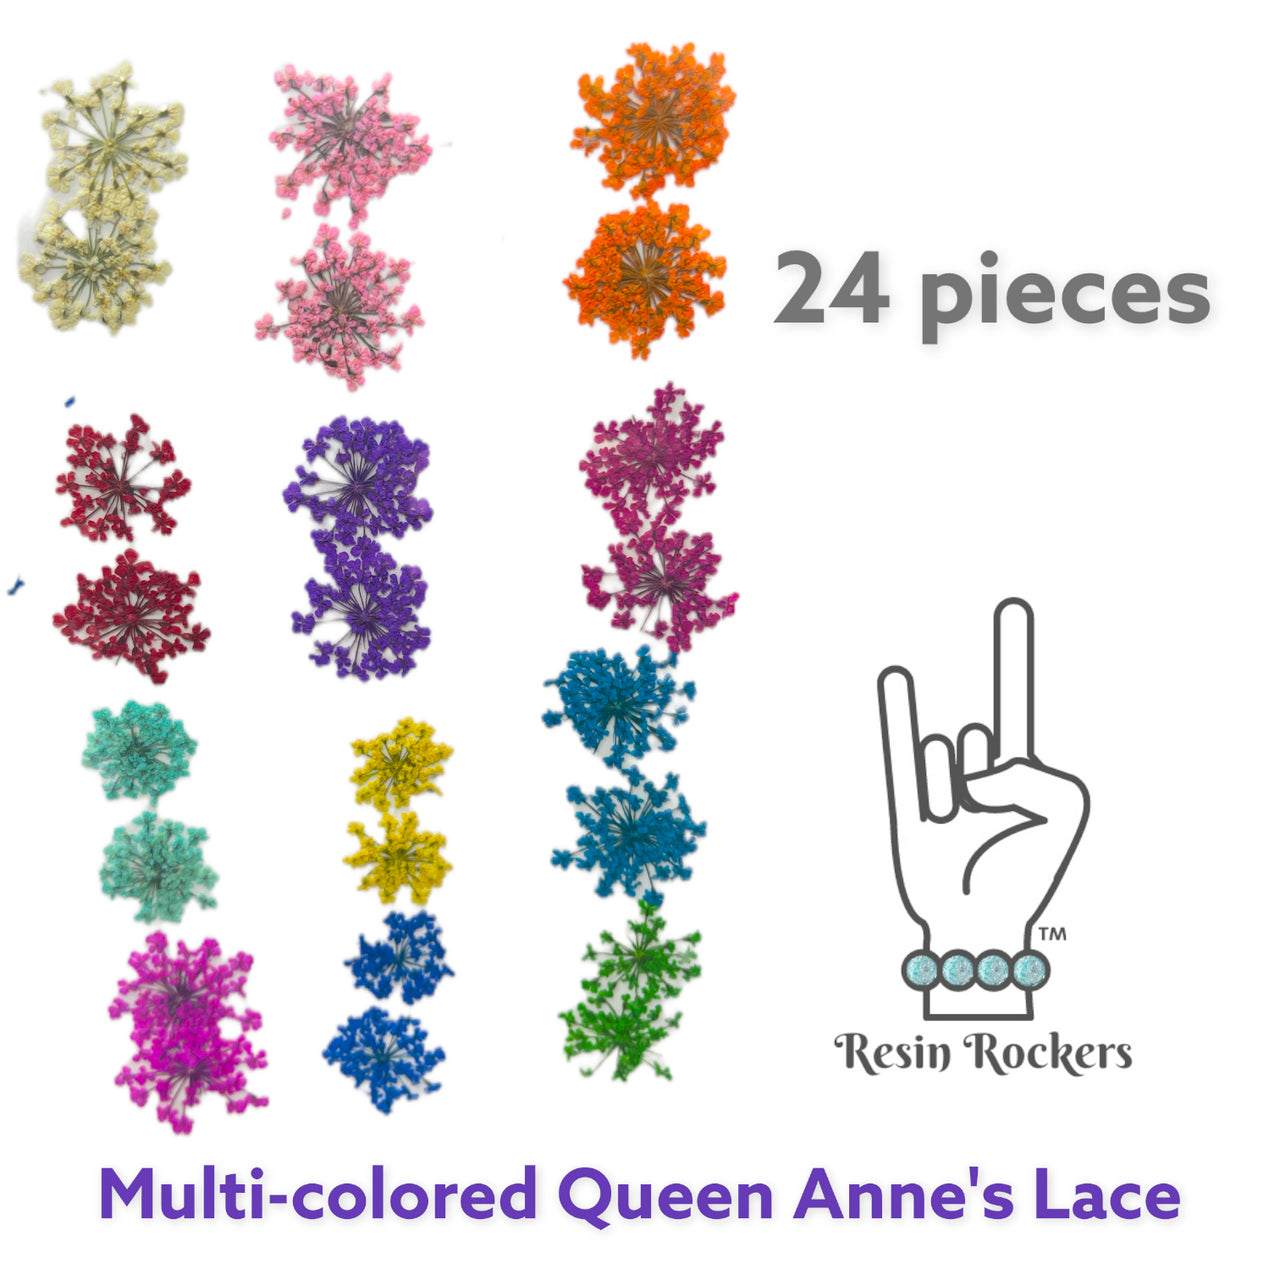 24 Piece Multi-colored Queen Anne's Lace Dried Pressed Real Natural Flowers For Epoxy & UV Resin Art